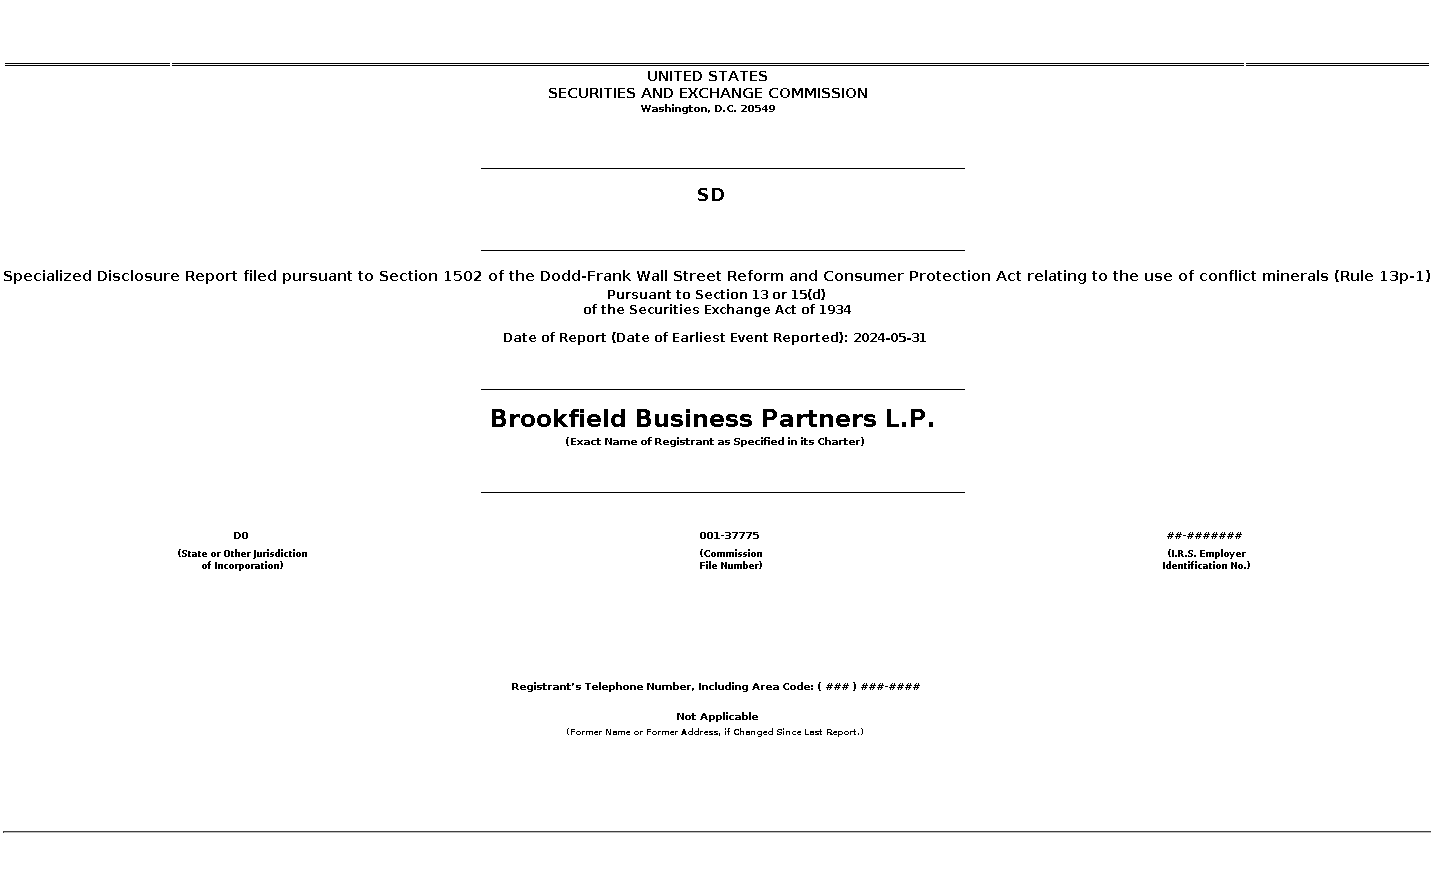 BBU : SD Specialized Disclosure Report filed pursuant to Section 1502 of the Dodd-Frank Wall Street Reform and Consumer Protection Act relating to the use of conflict minerals (Rule 13p-1)